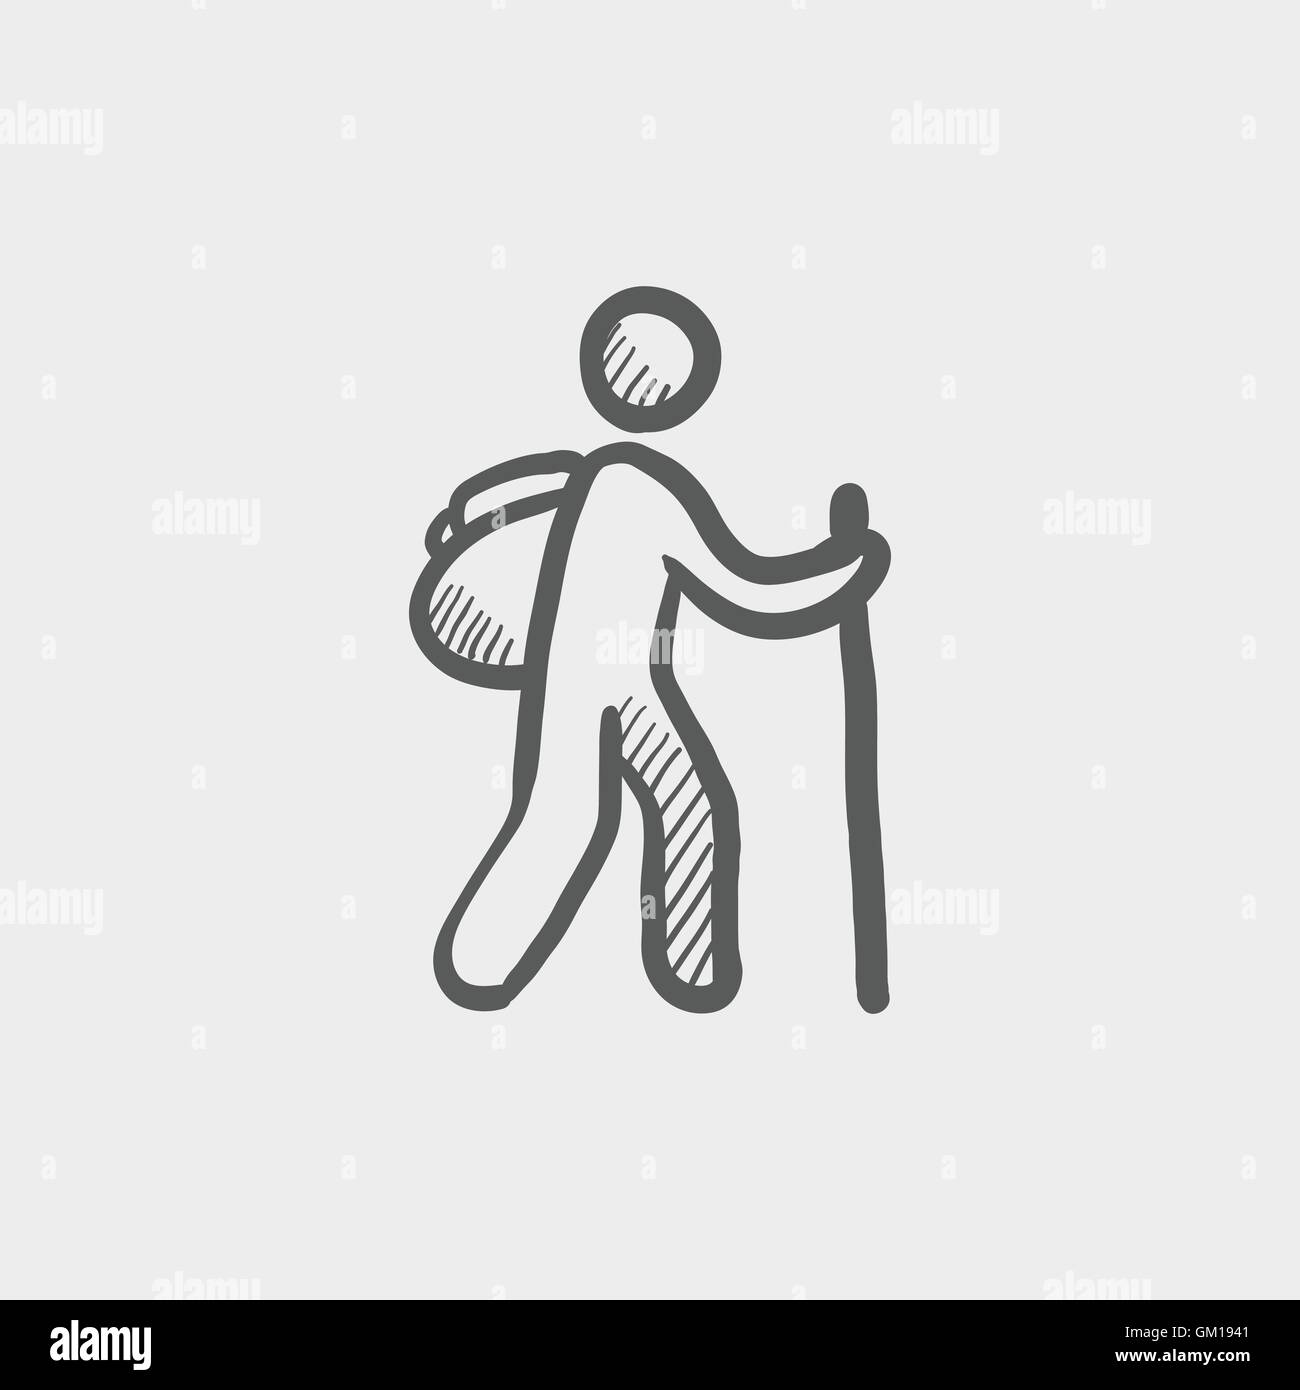 Hiking exercise sketch icon Stock Vector